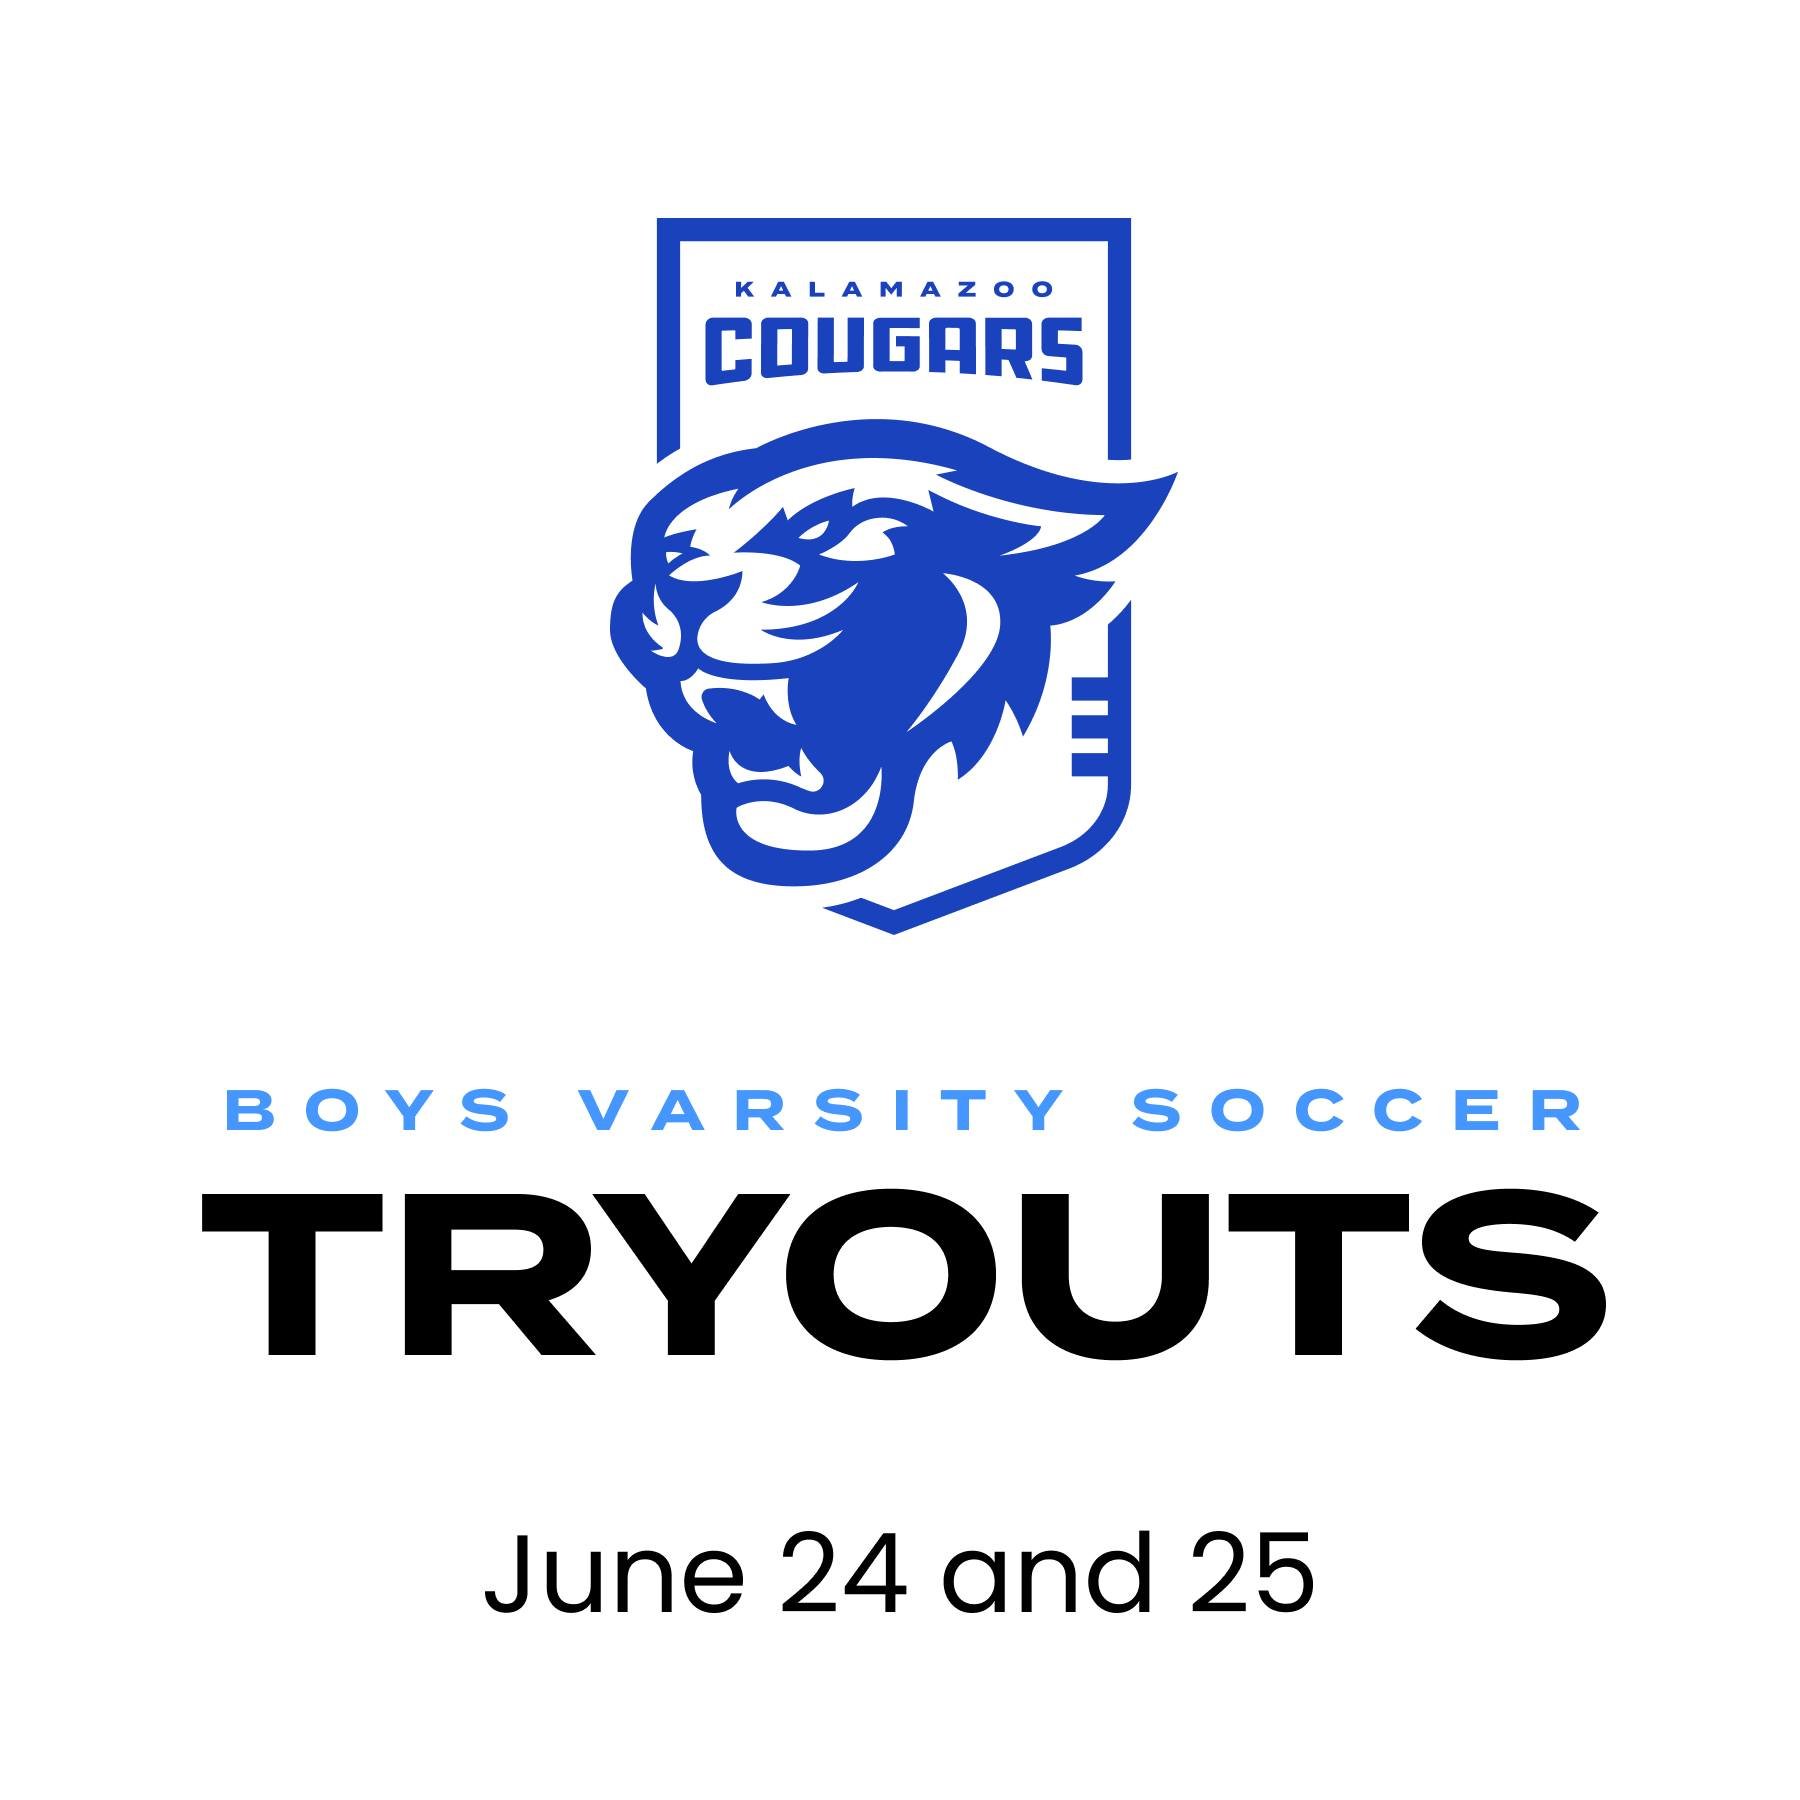 Count down starts for Cougars Boys Soccer Tryouts on June 24 and 25. Voluntary soccer opportunities are below.

Who: Homeschooled Middle to High School-age boys interested in Cougar Fall Soccer (will be separated appropriately) 
What: All things socc